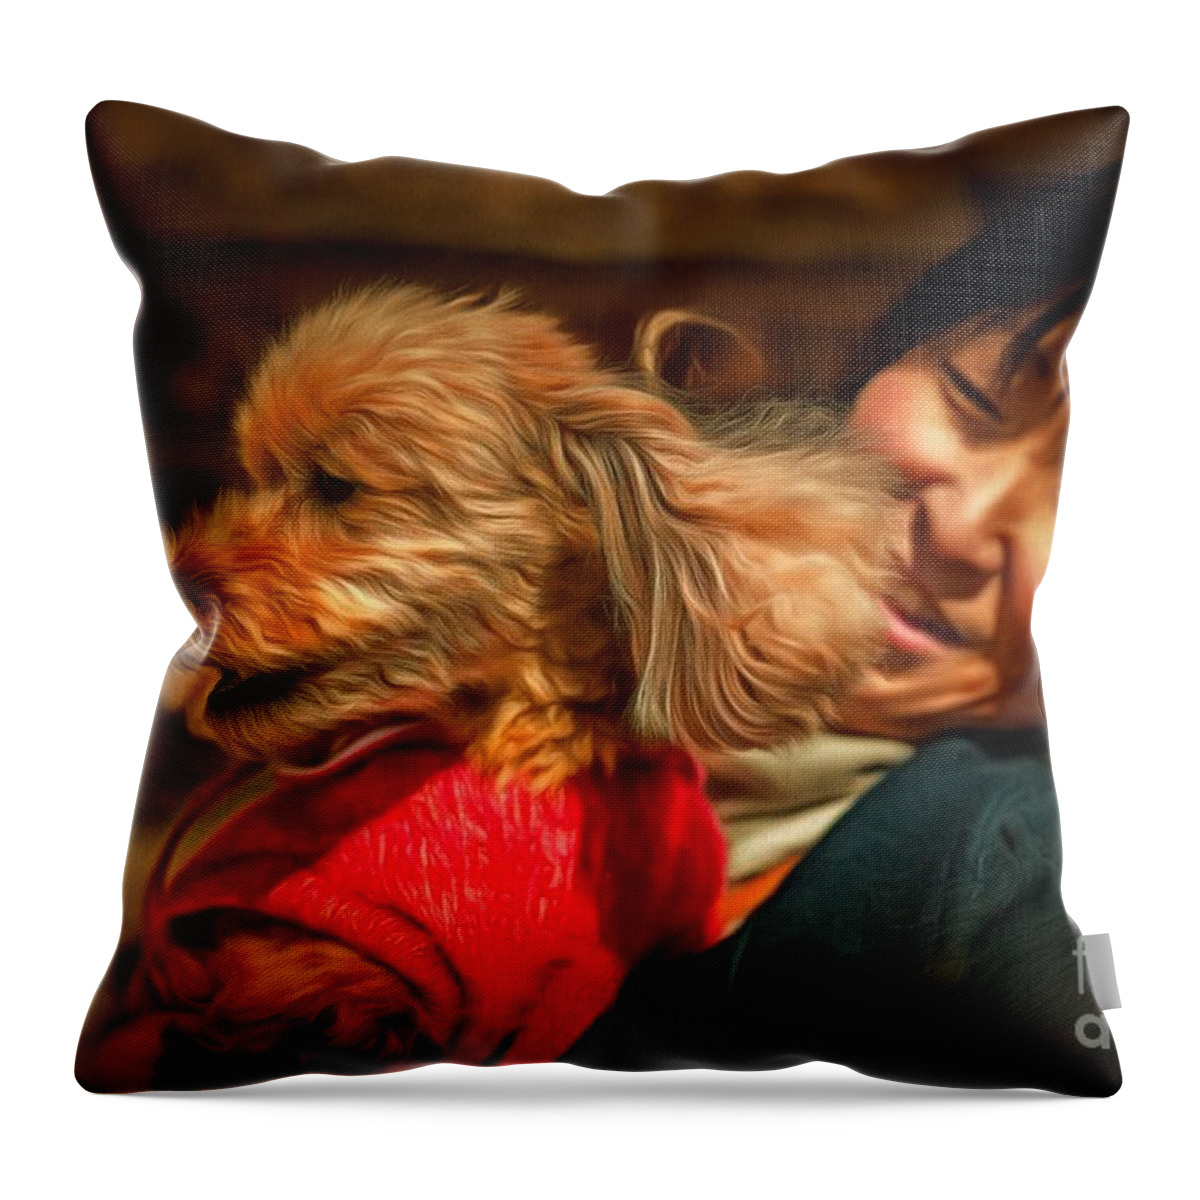 Pet Throw Pillow featuring the digital art Portrait with a Pet by Eva Lechner